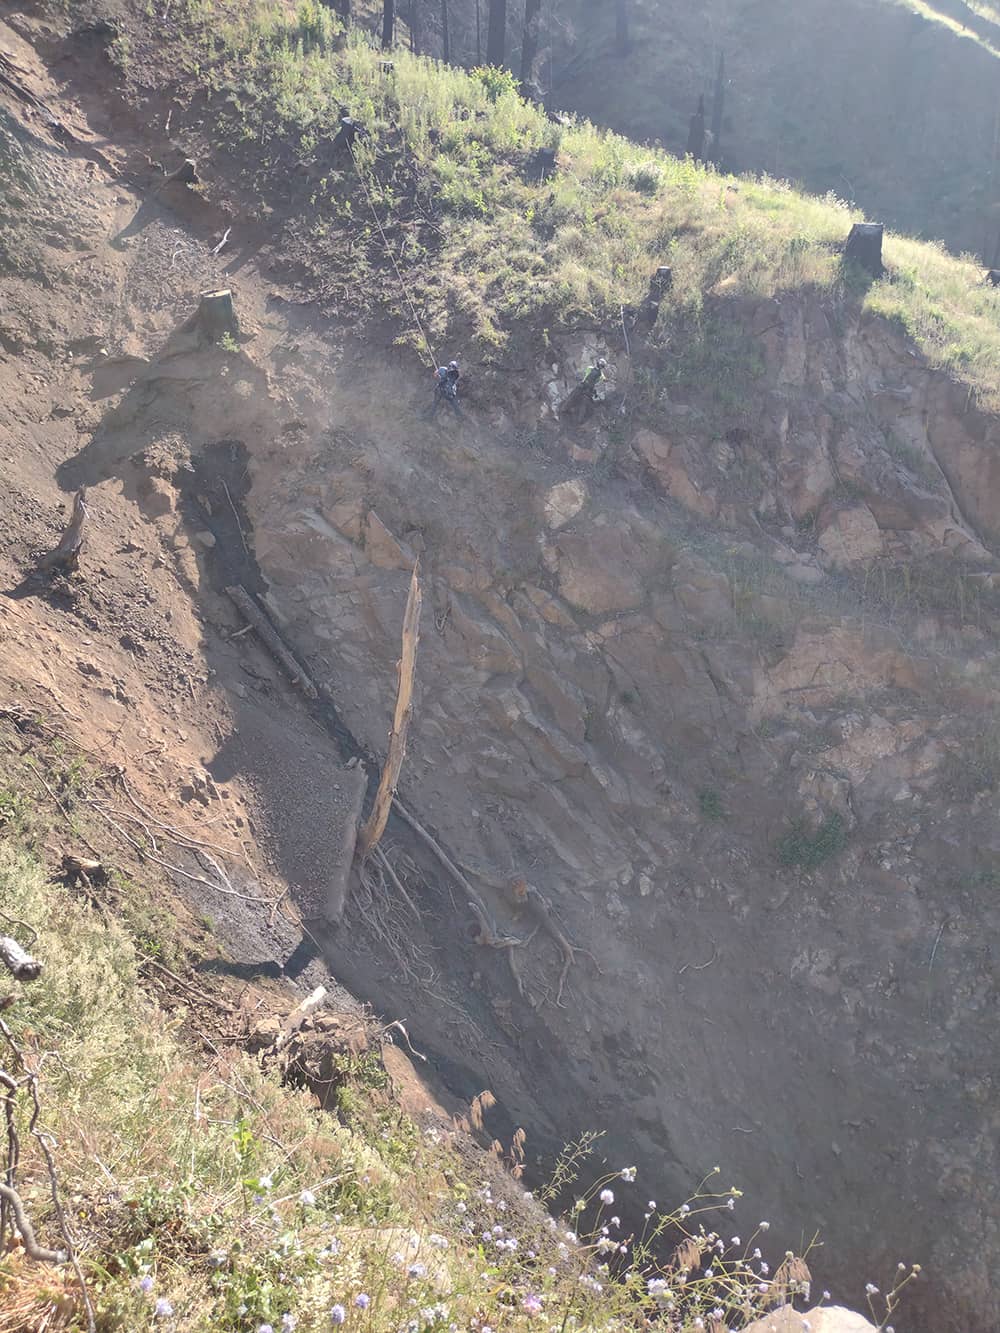 A photo of 2 trained professionals performing rope access and landslide mitigation work